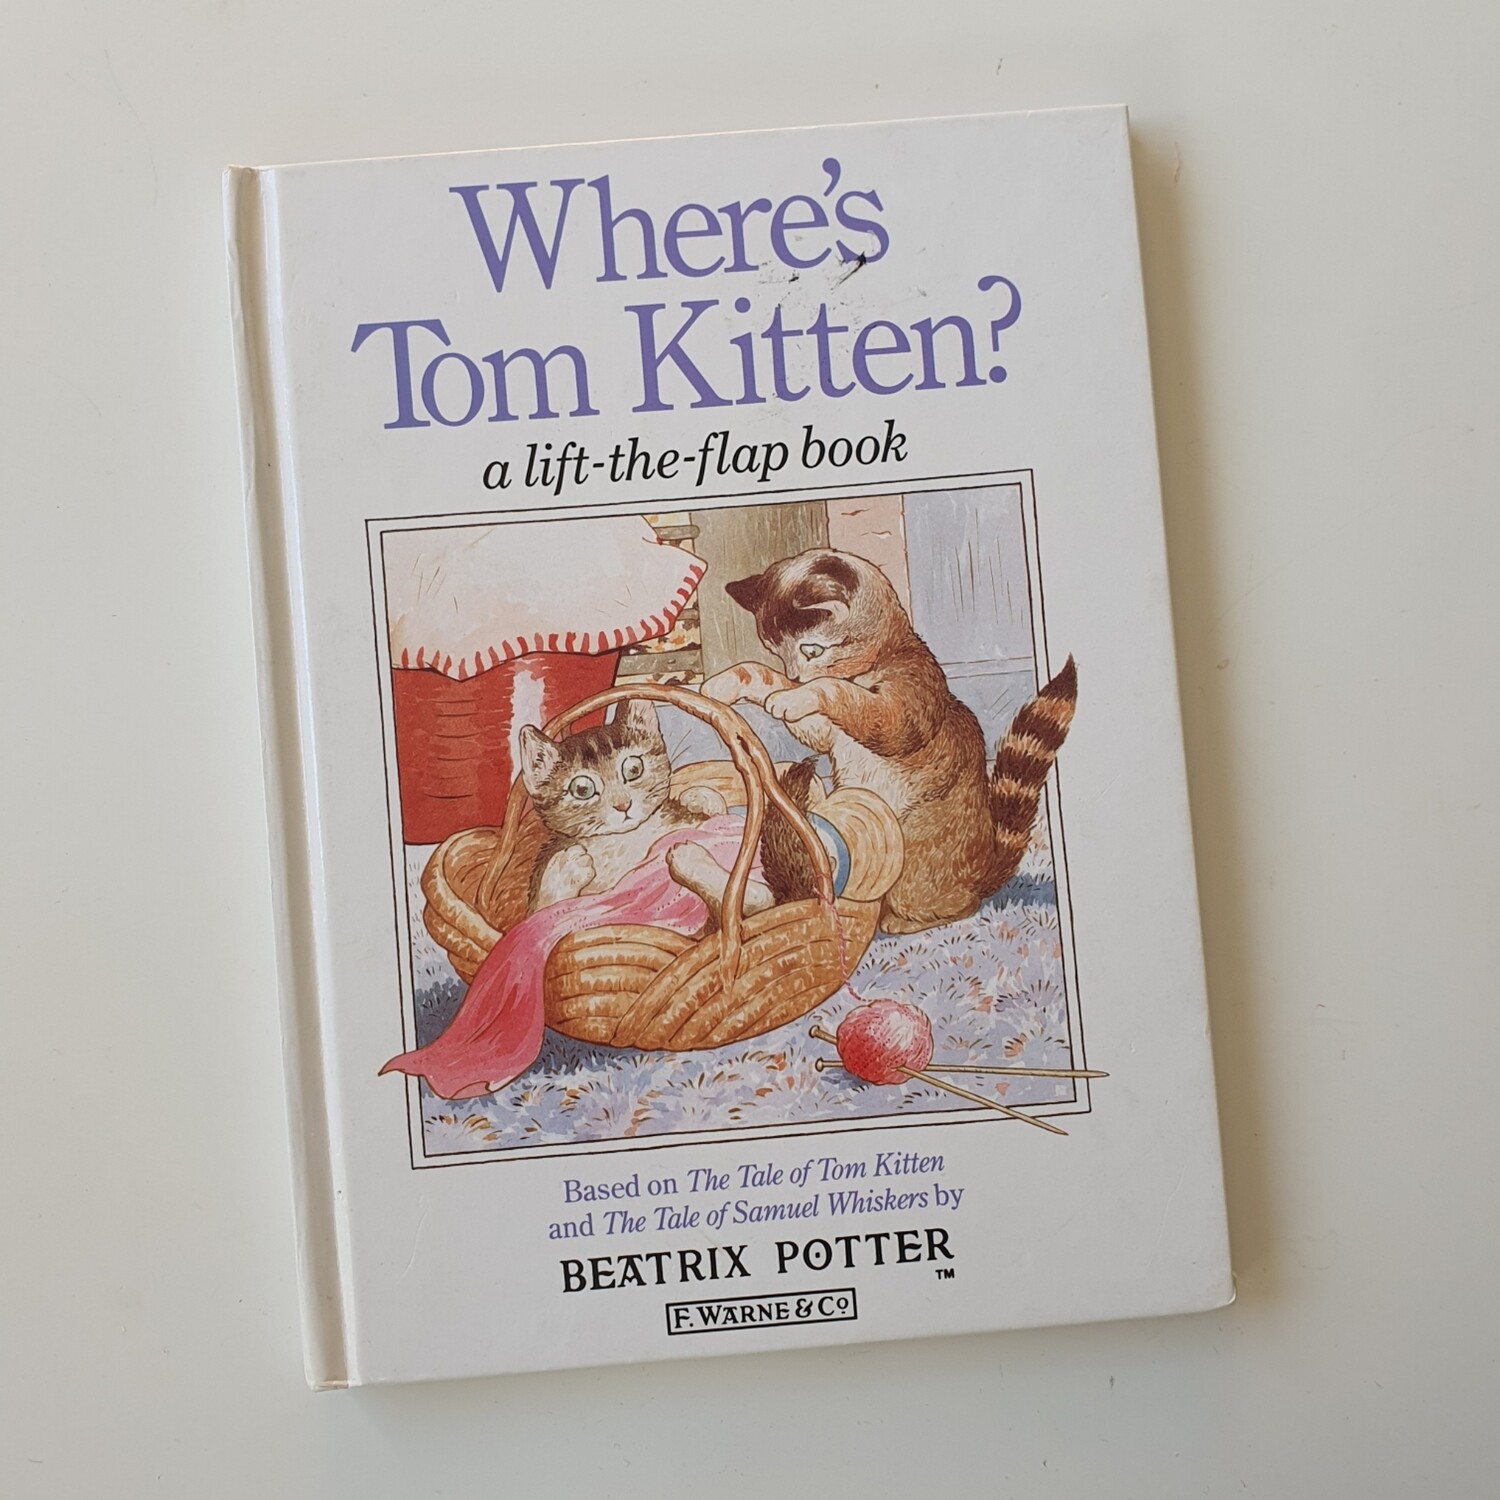 Where's Tom Kitten - lift the flap book by Beatrix Potter